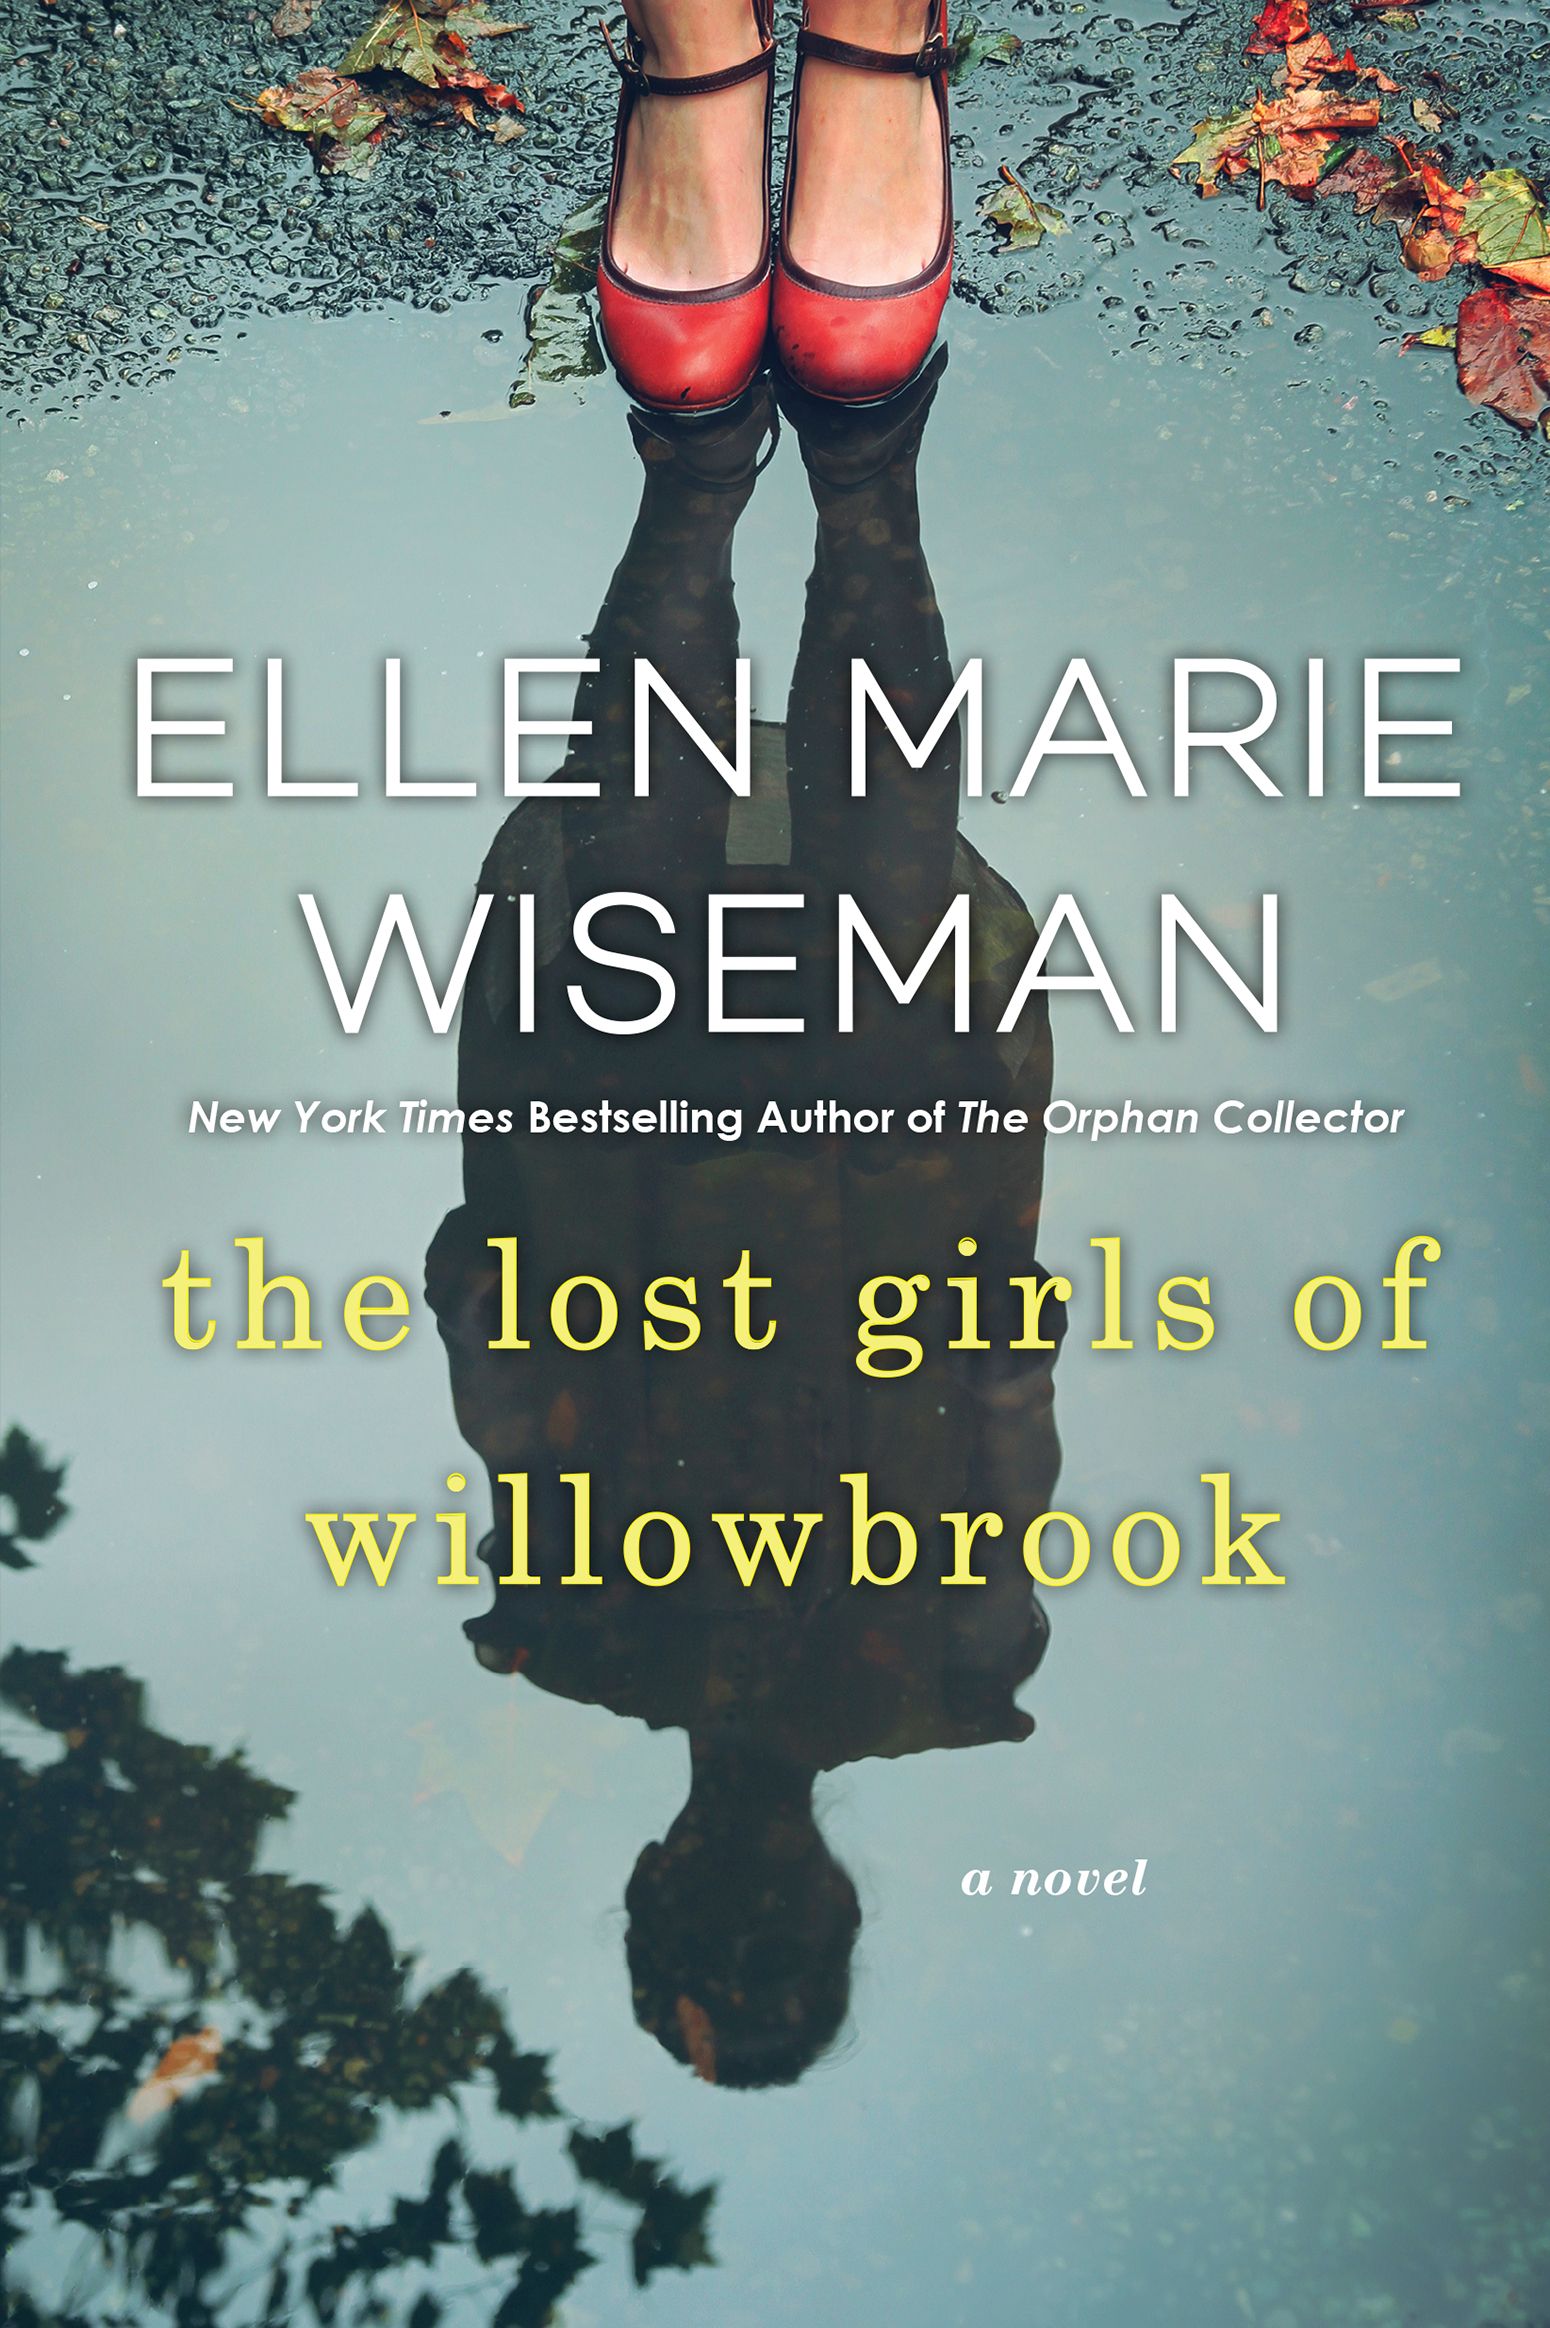 Cover of the book: the lost girls of willowbrook by Ellen Marie Wiseman